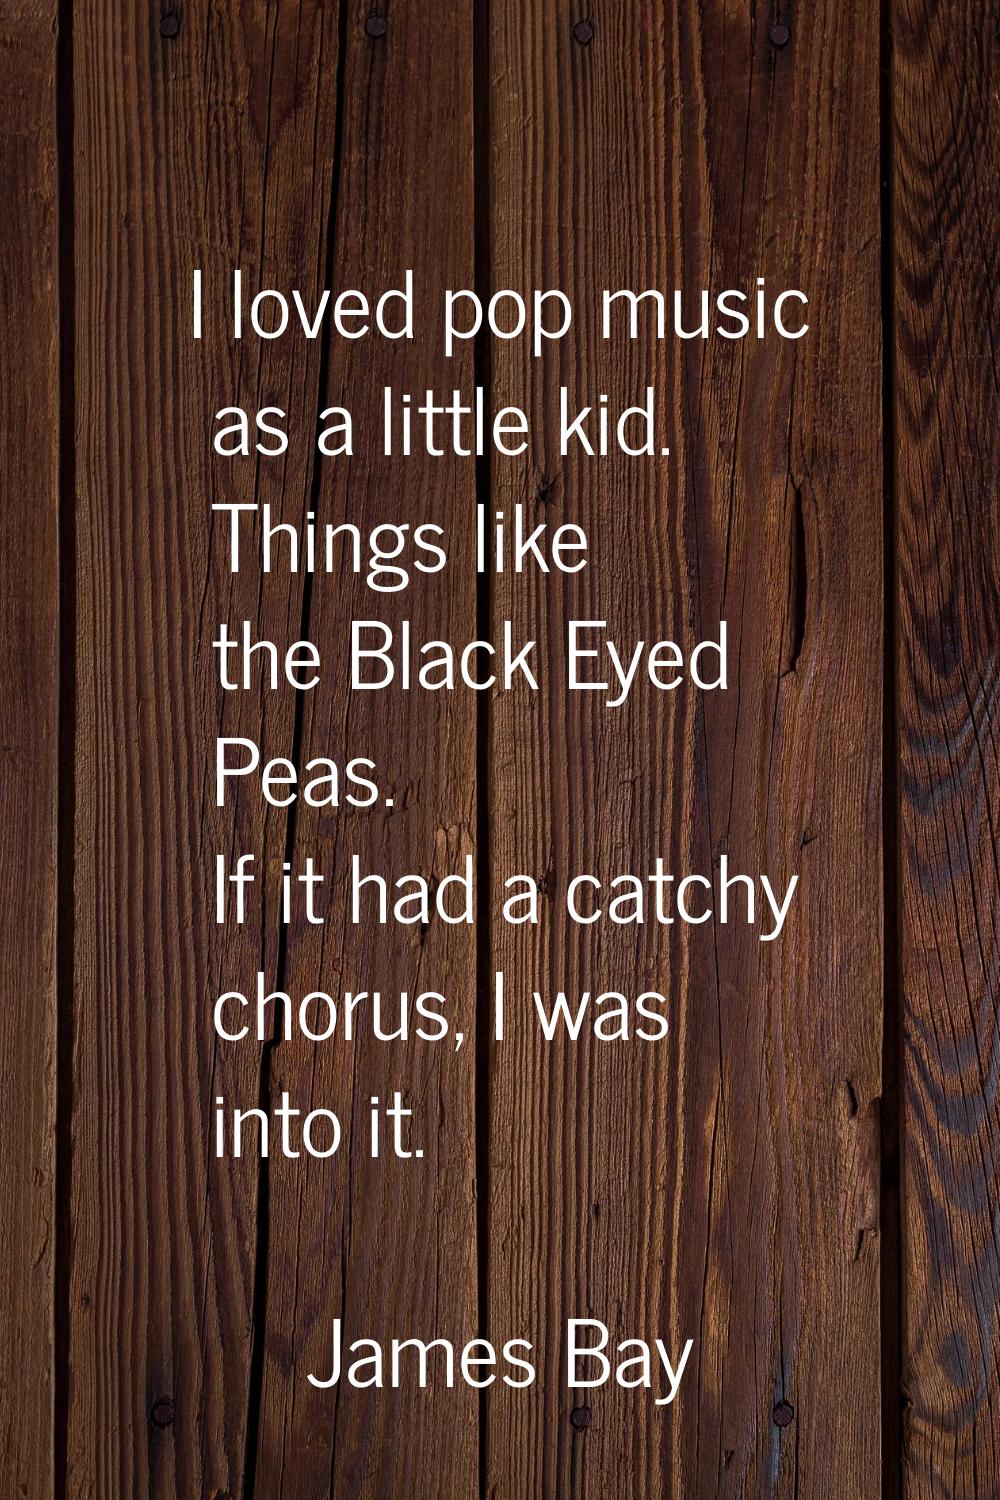 I loved pop music as a little kid. Things like the Black Eyed Peas. If it had a catchy chorus, I wa